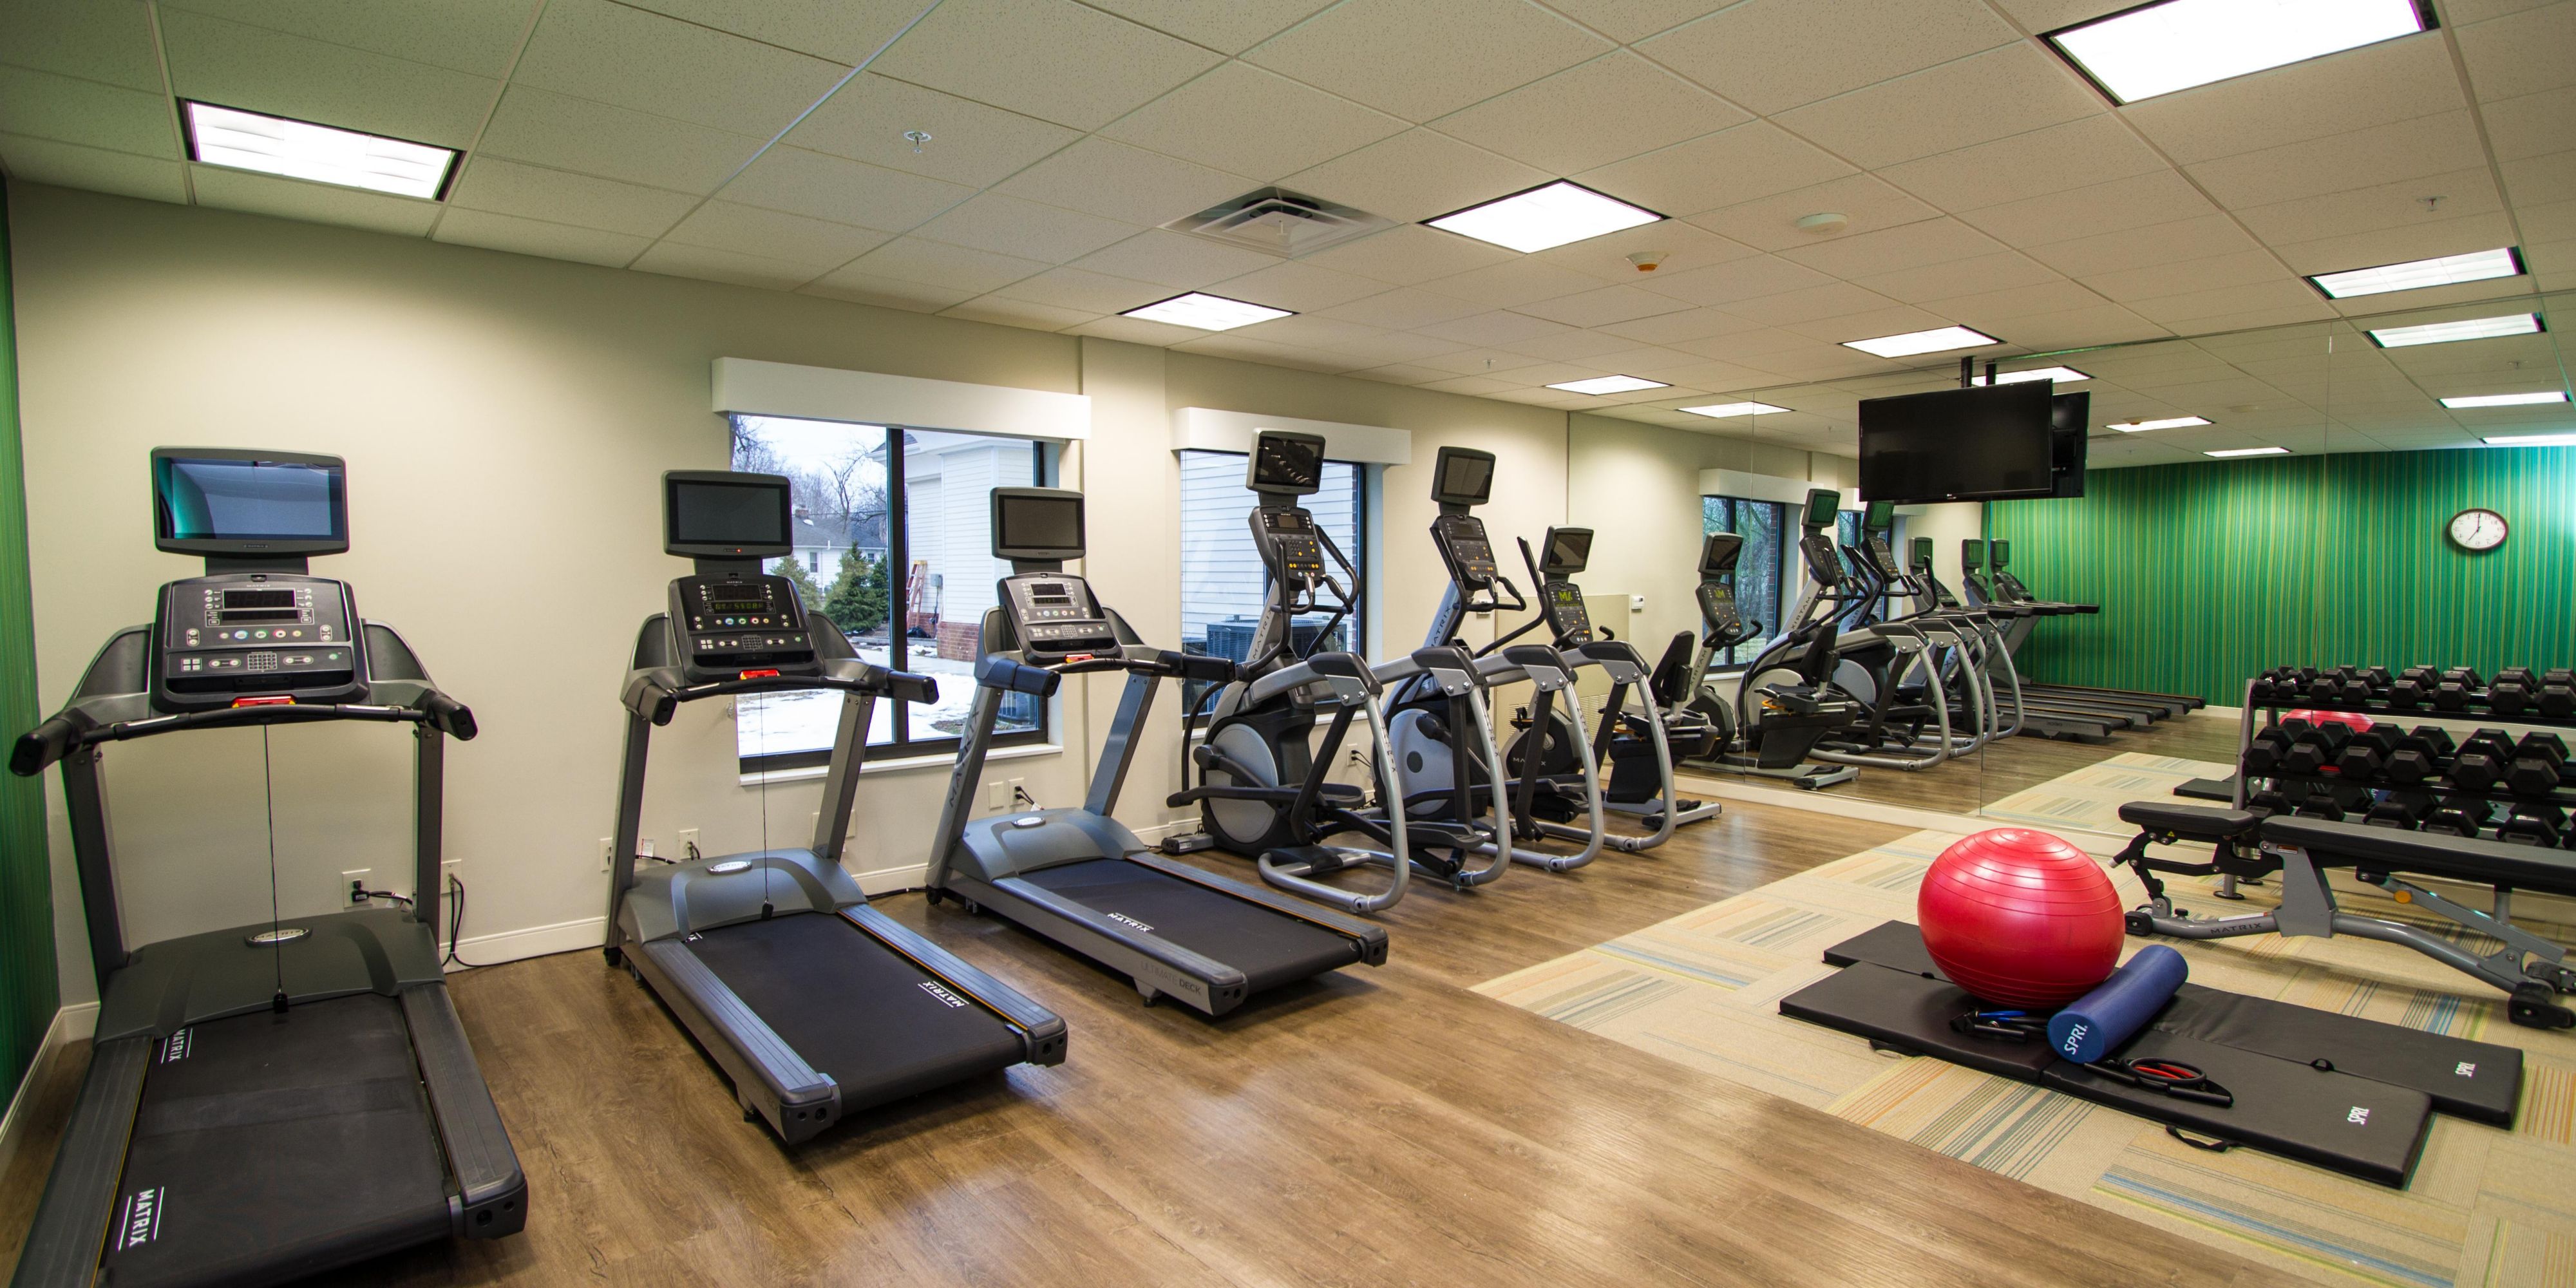 We are happy to provide a 24-hour Fitness Center with new equipment and free weights. Our large space includes a stretching area with full length mirrors.